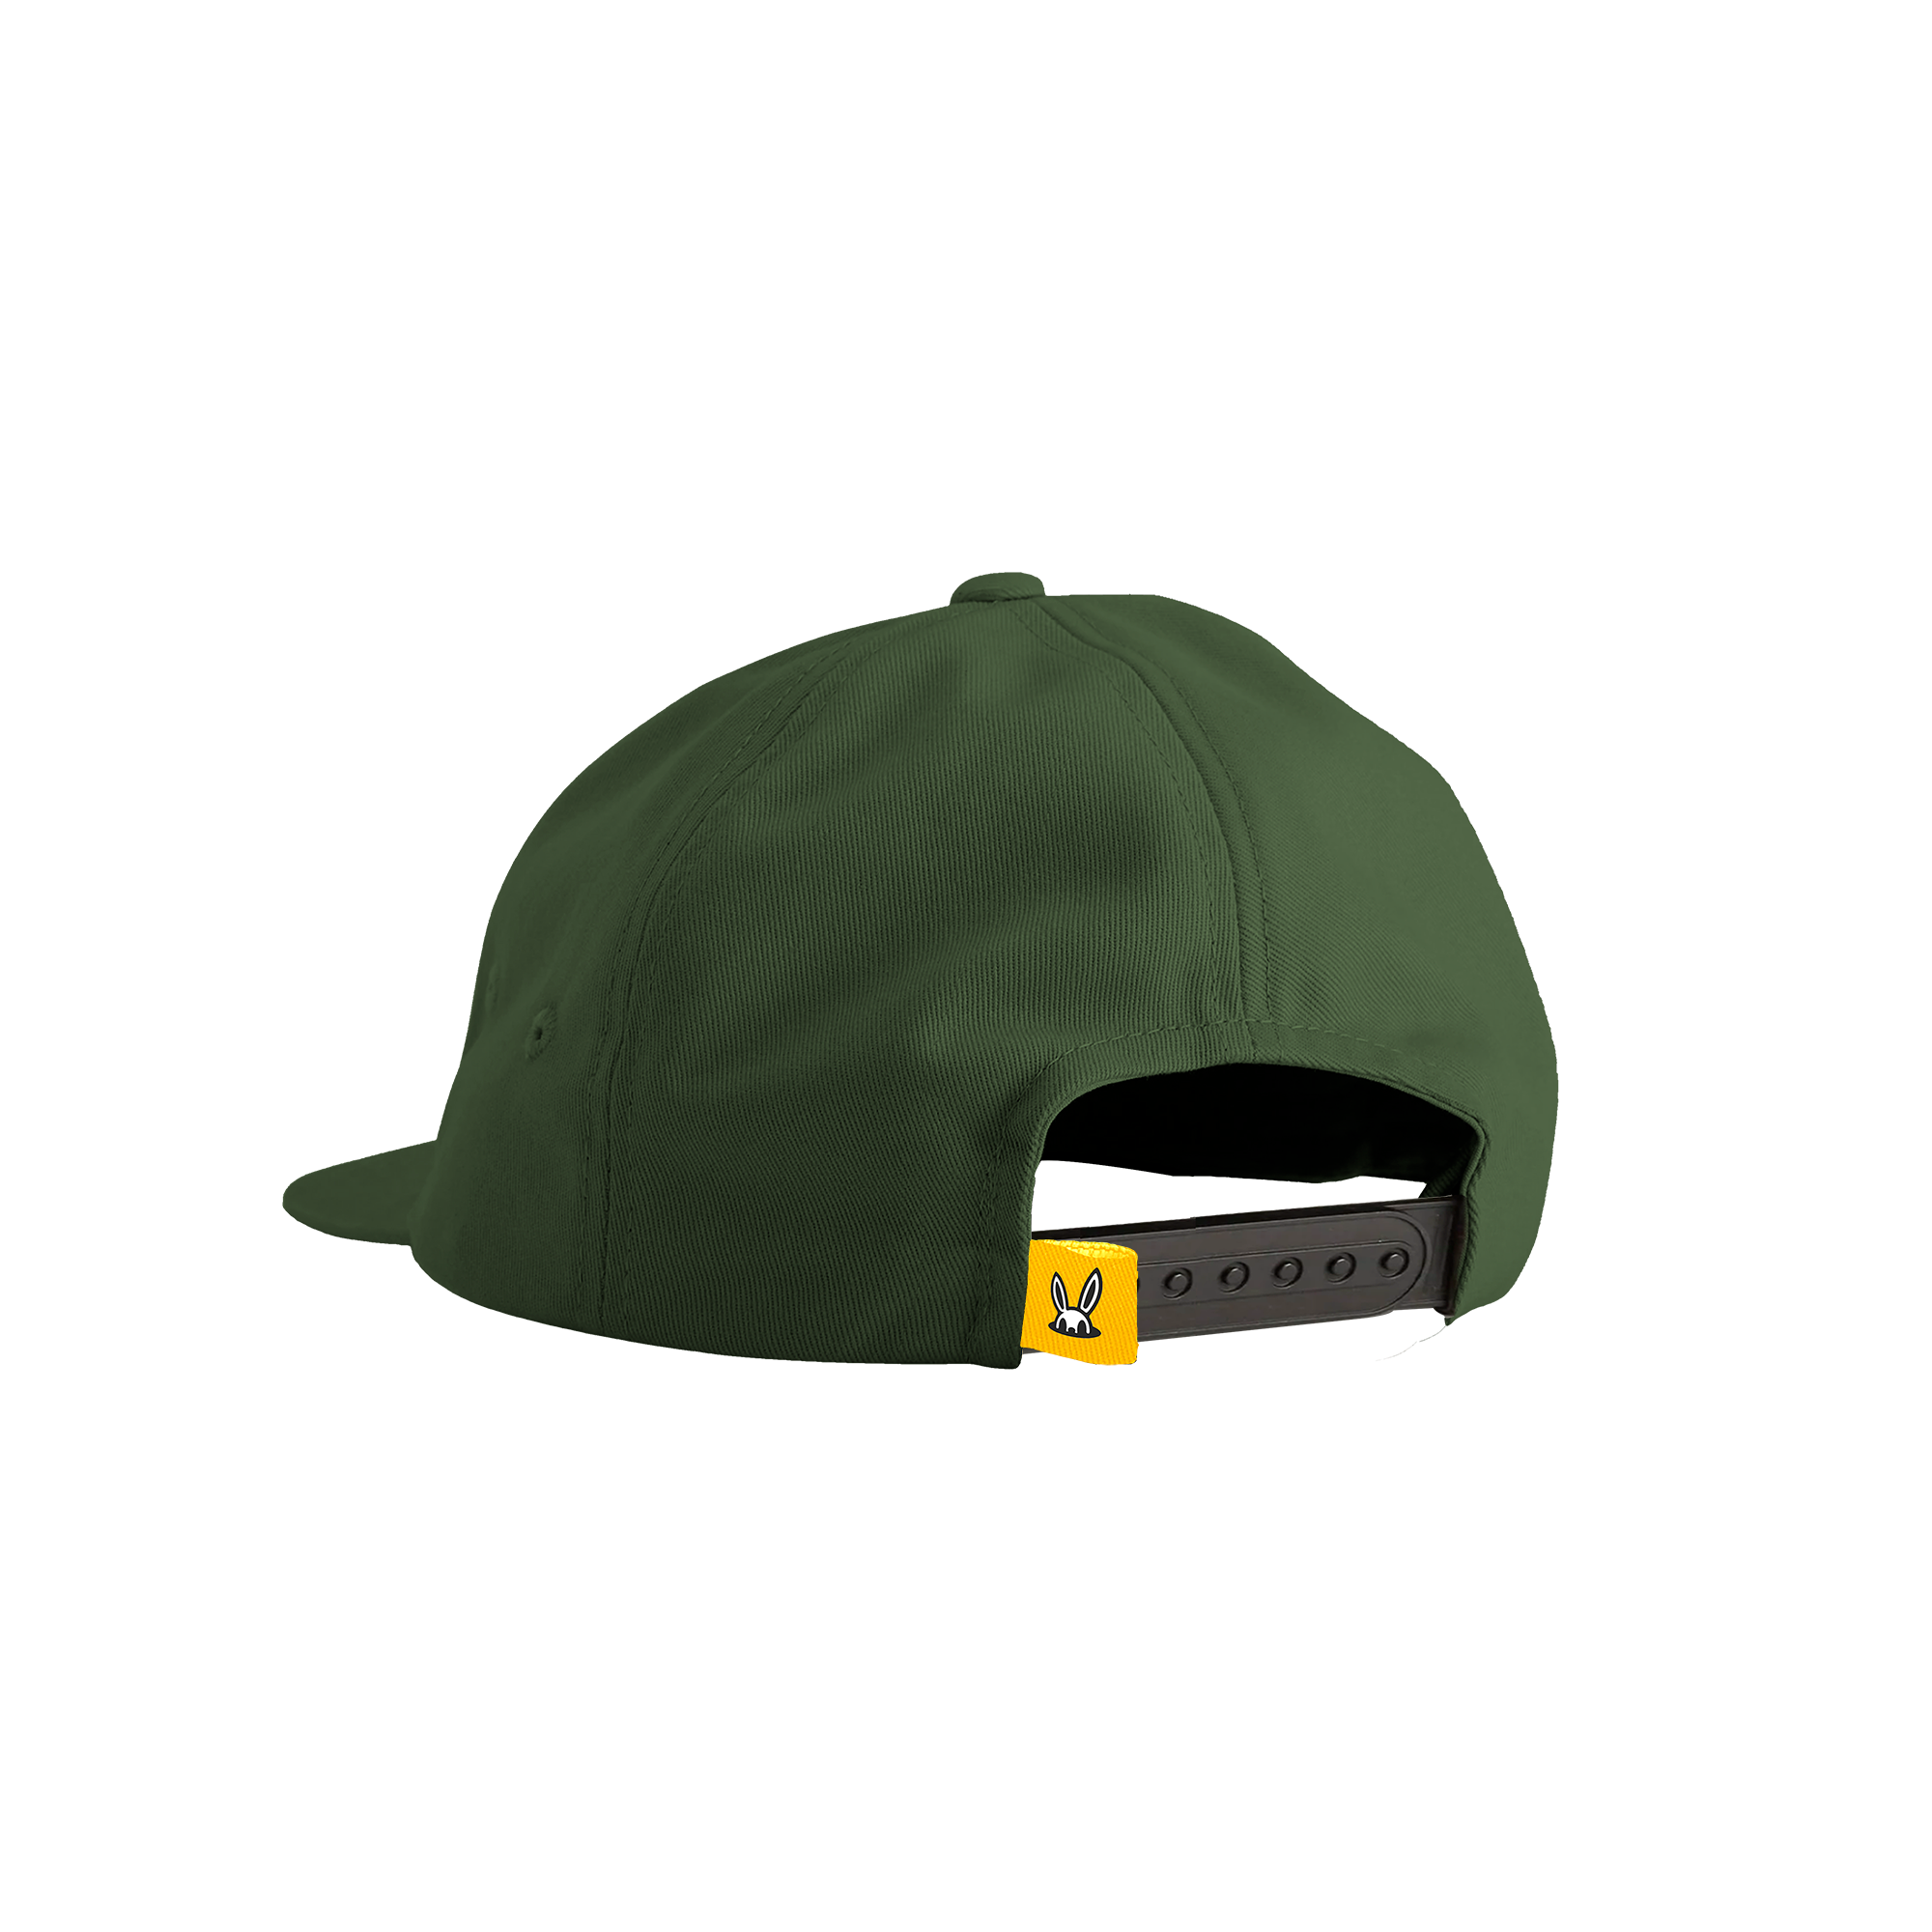 HPPRS Classic Icon Snapback